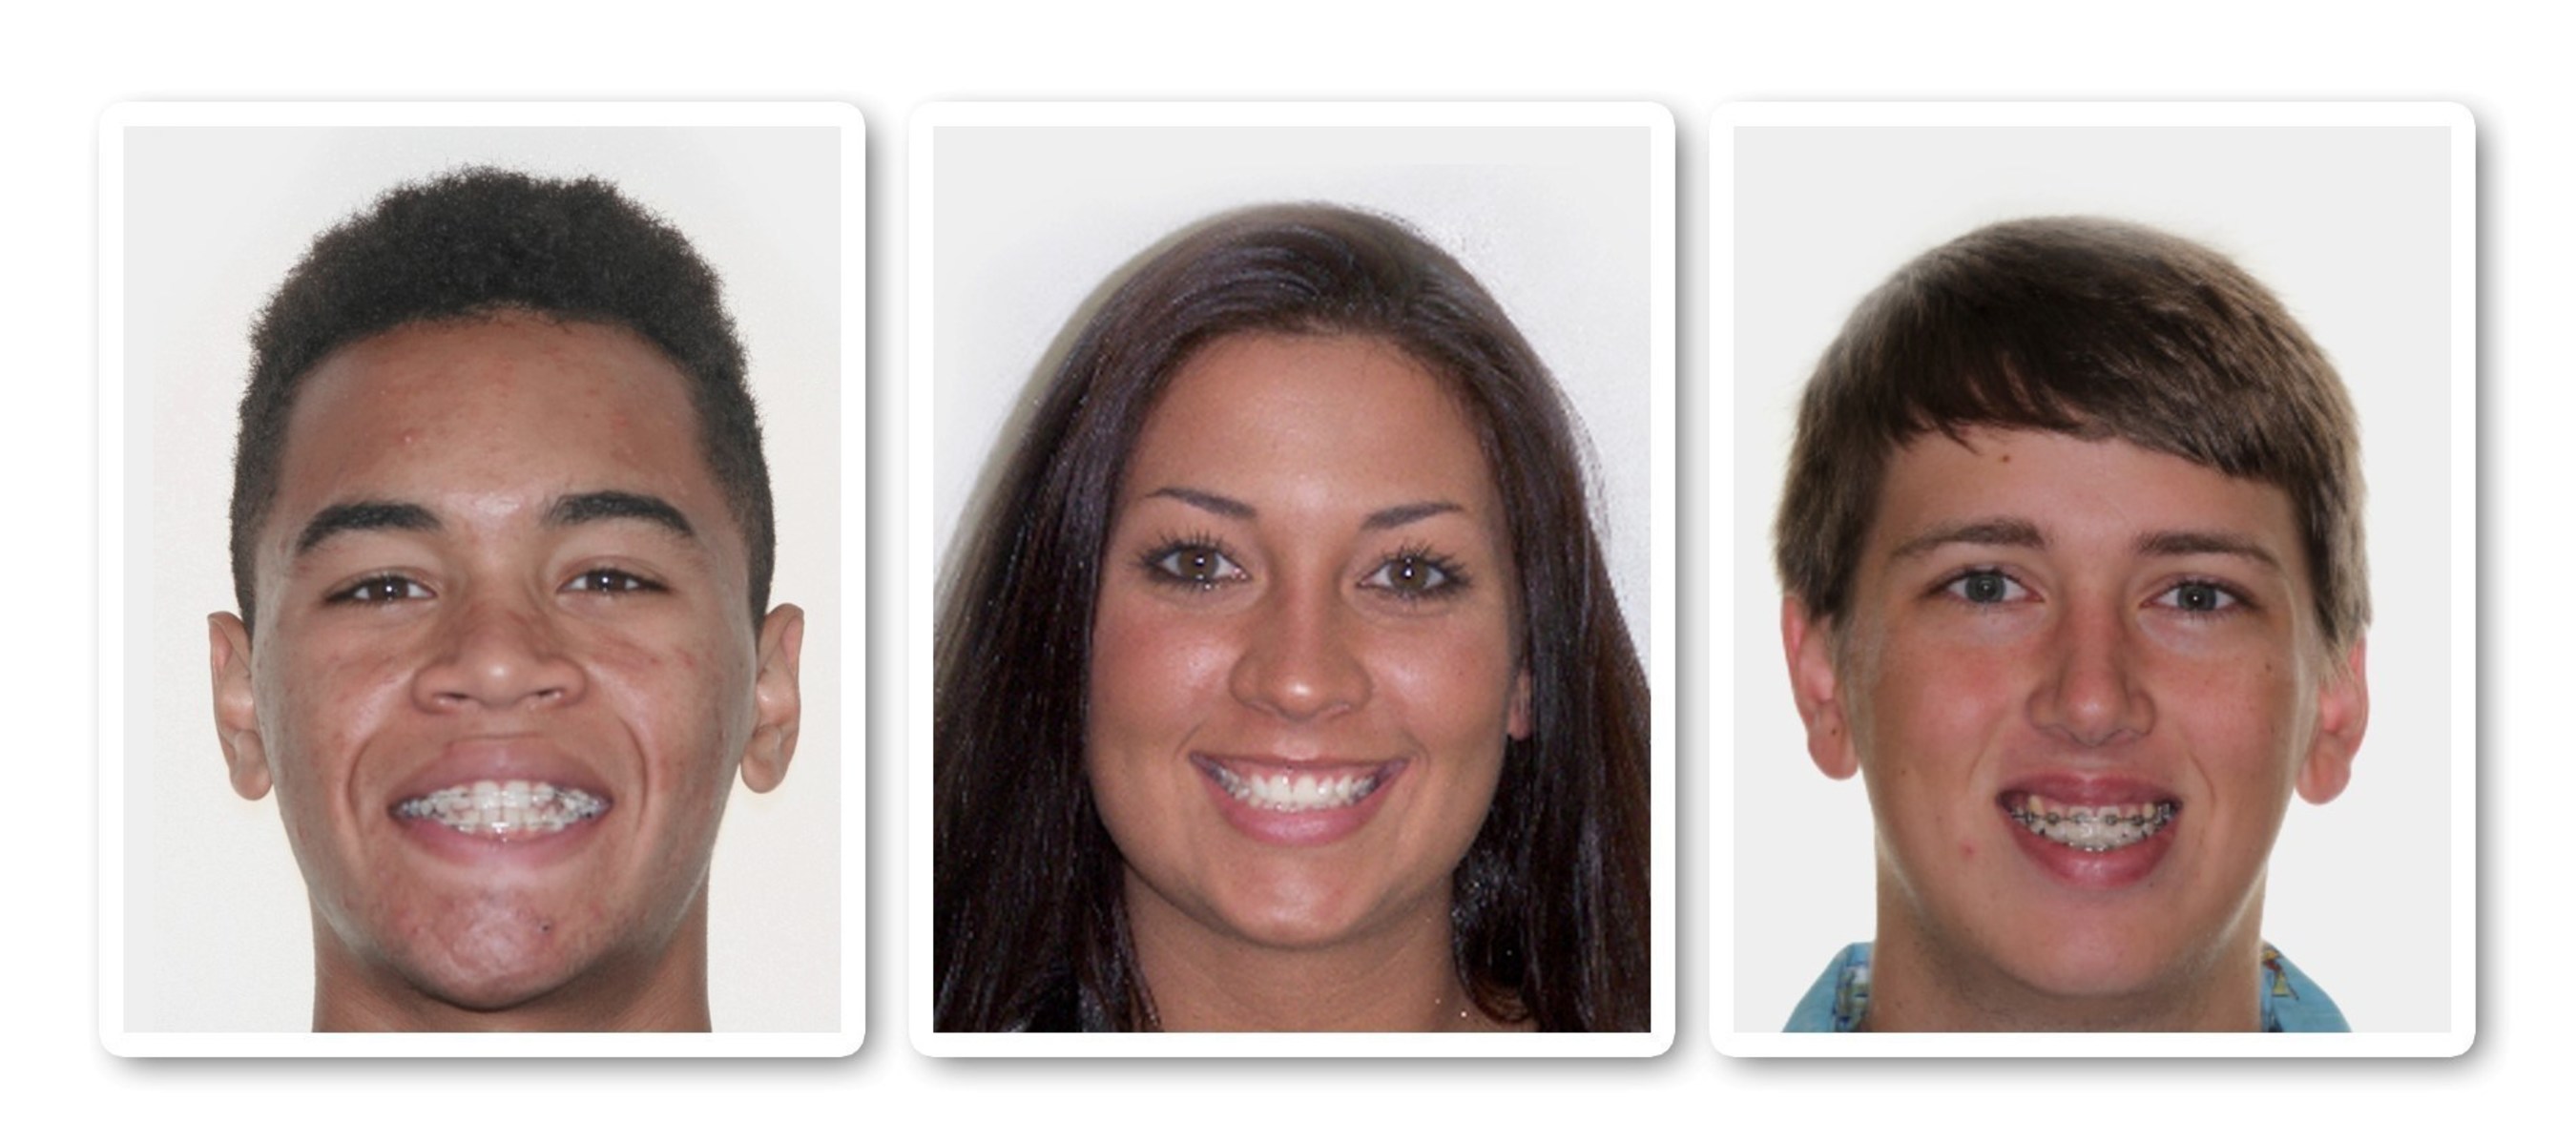 Orthodontic patients (from left to right) Rey Rivera, Tiffany Tapler and Chase Bethay choose AcceleDent to speed up their treatment. AcceleDent is an FDA-cleared, Class II medical device that speeds orthodontic tooth movement by as much as 50 percent.